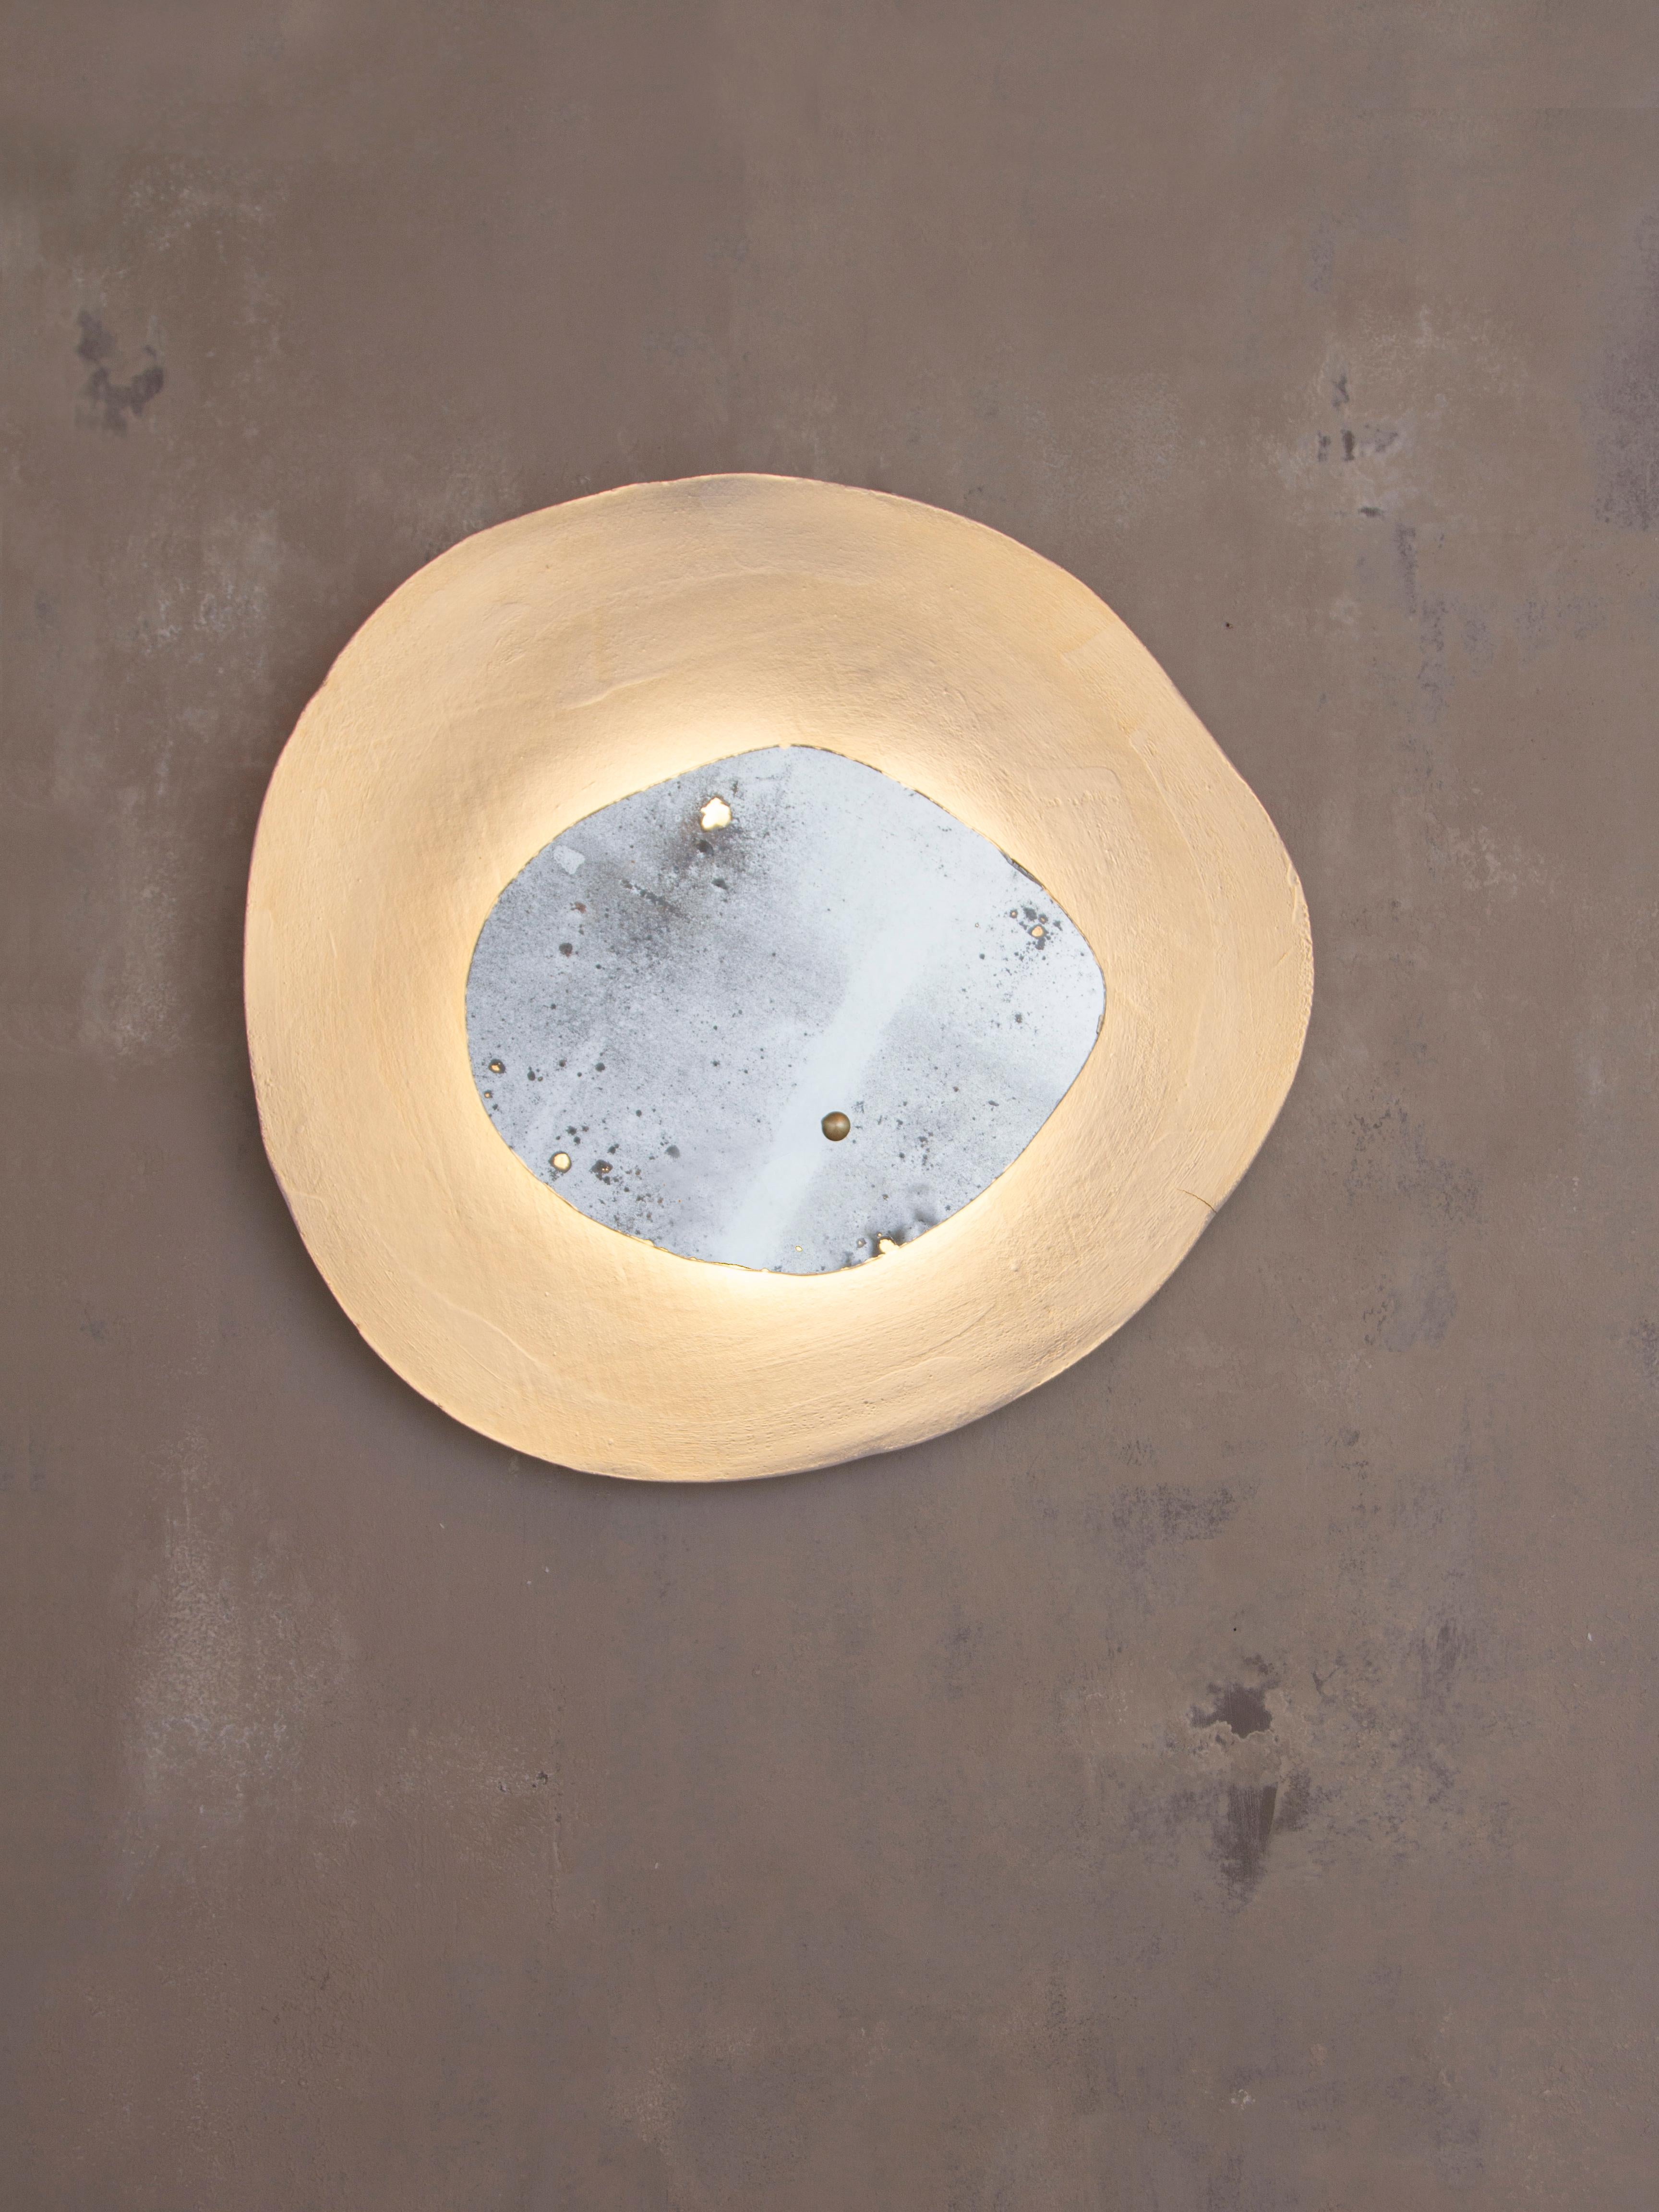 Echo #3 wall light by Margaux Leycuras
One of a Kind, Signed and numbered
Dimensions: D 6 x W 56 x H 53 cm 
Material: Ceramic, sand stoneware top with a porcelain engobe finish and old mercury mirror.
The piece is signed, numbered and delivered